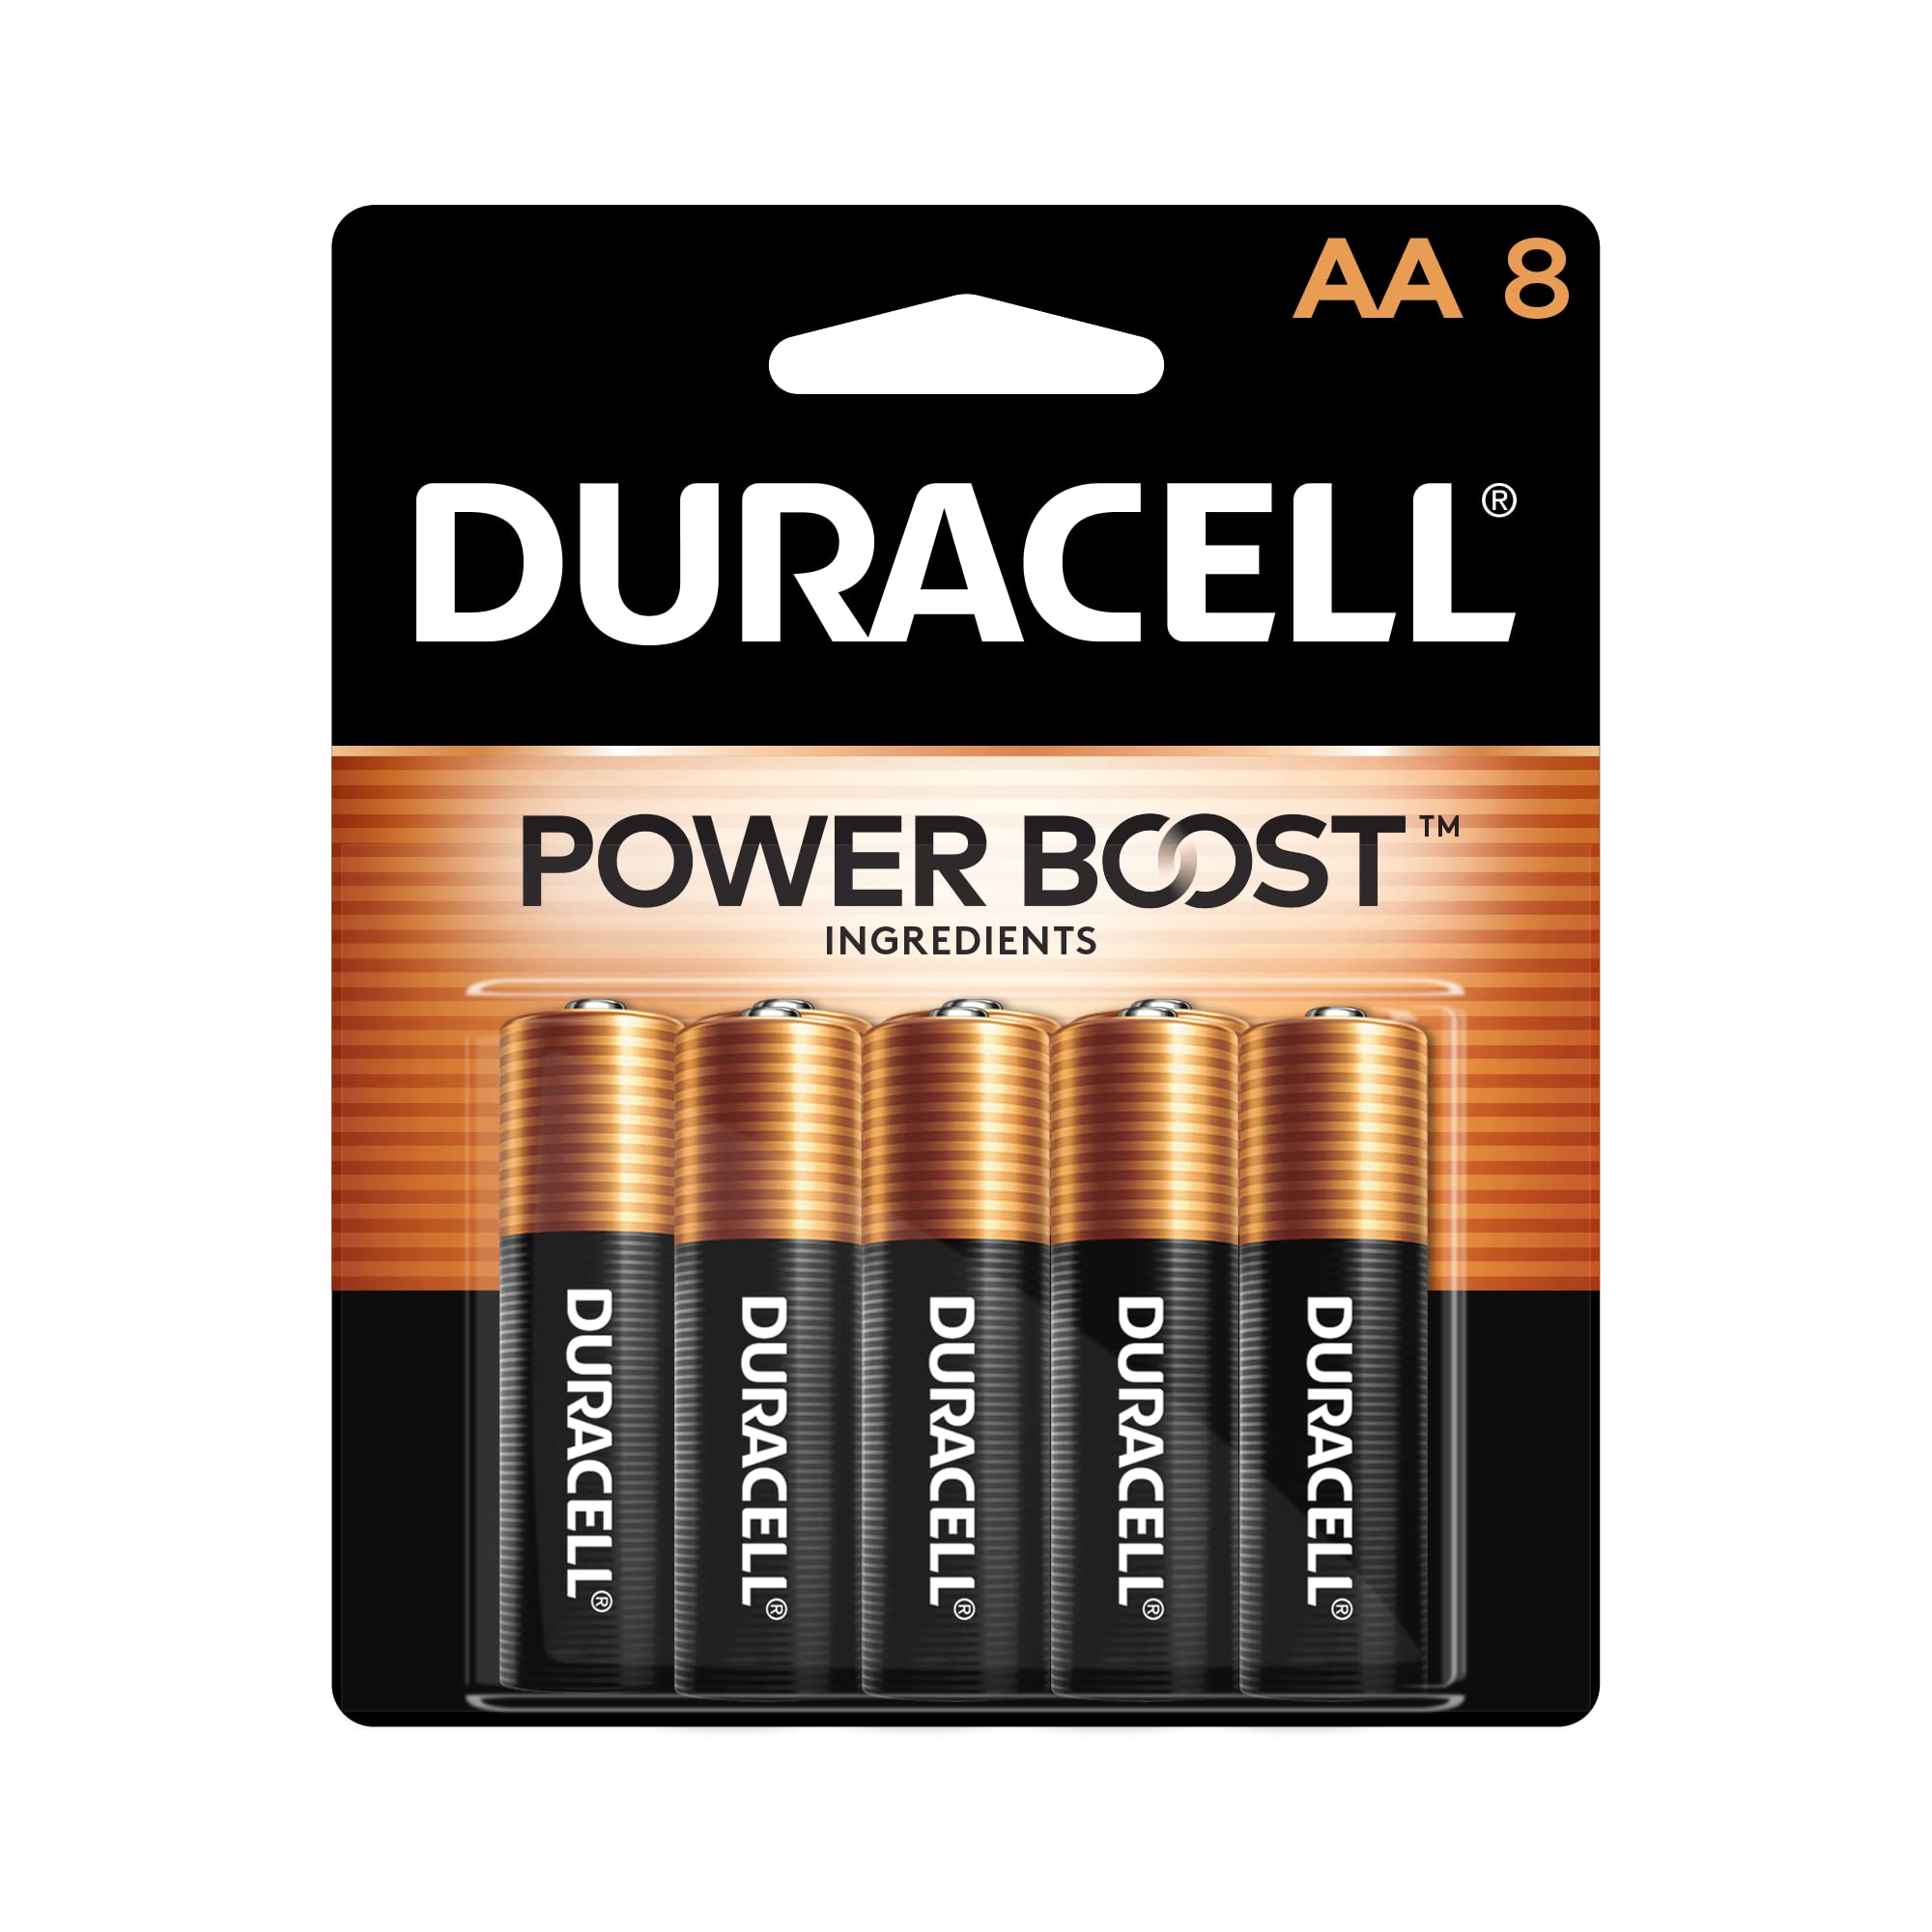 Mua Duracell Coppertop AA Batteries with Power Boost Ingredients, 8 Count  Pack Double A Battery with Long-lasting Power, Alkaline AA Battery for  Household and Office Devices trên Amazon Mỹ chính hãng 2023 |